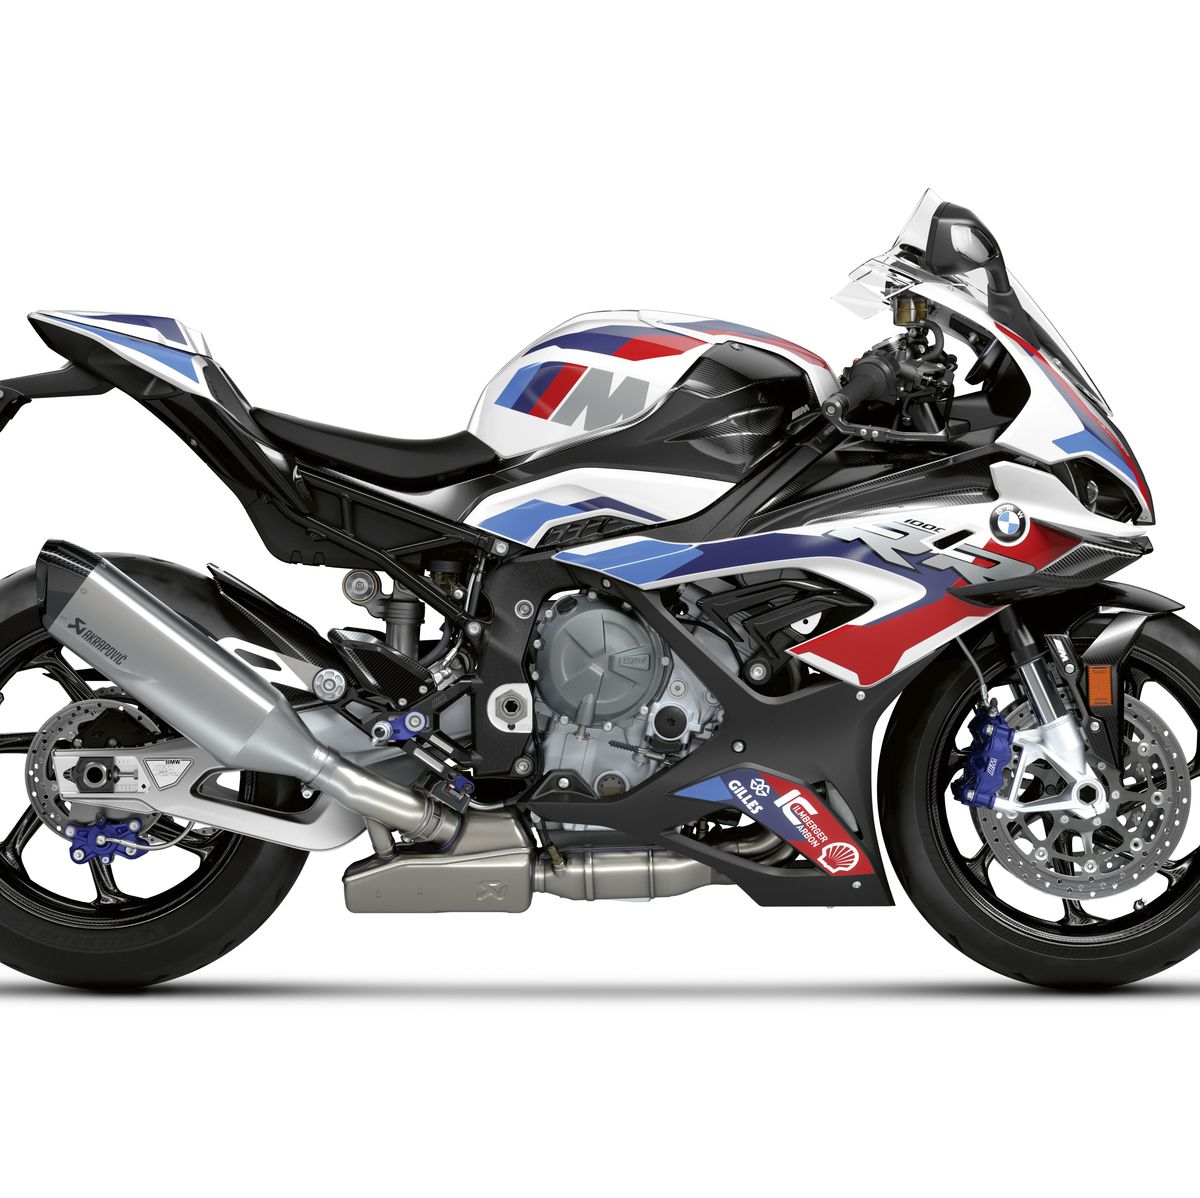 BMW M 1000 RR, Full technical specification and features